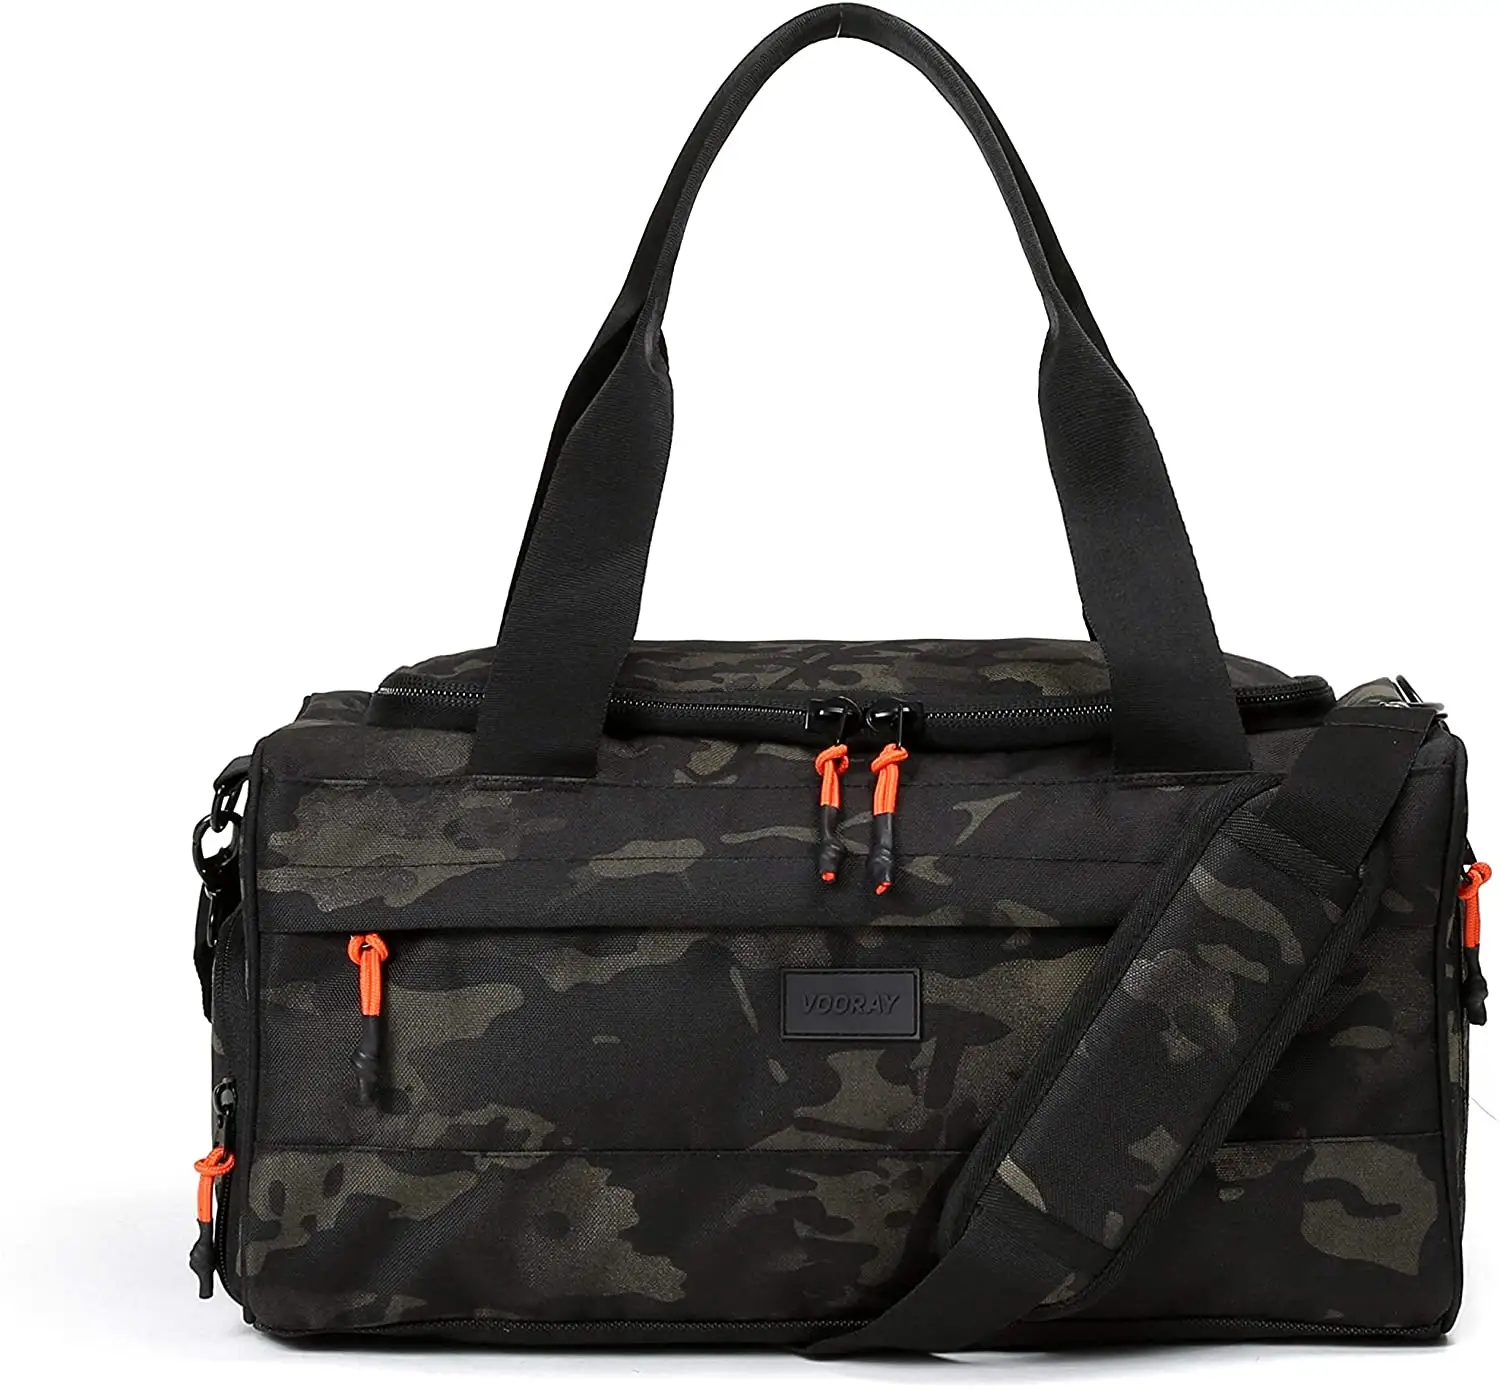 Waterproof Gym Bag with Shoe Compartment Accessory Pockets Small Overnight Travel Bag Durable Sports Duffel Men Women